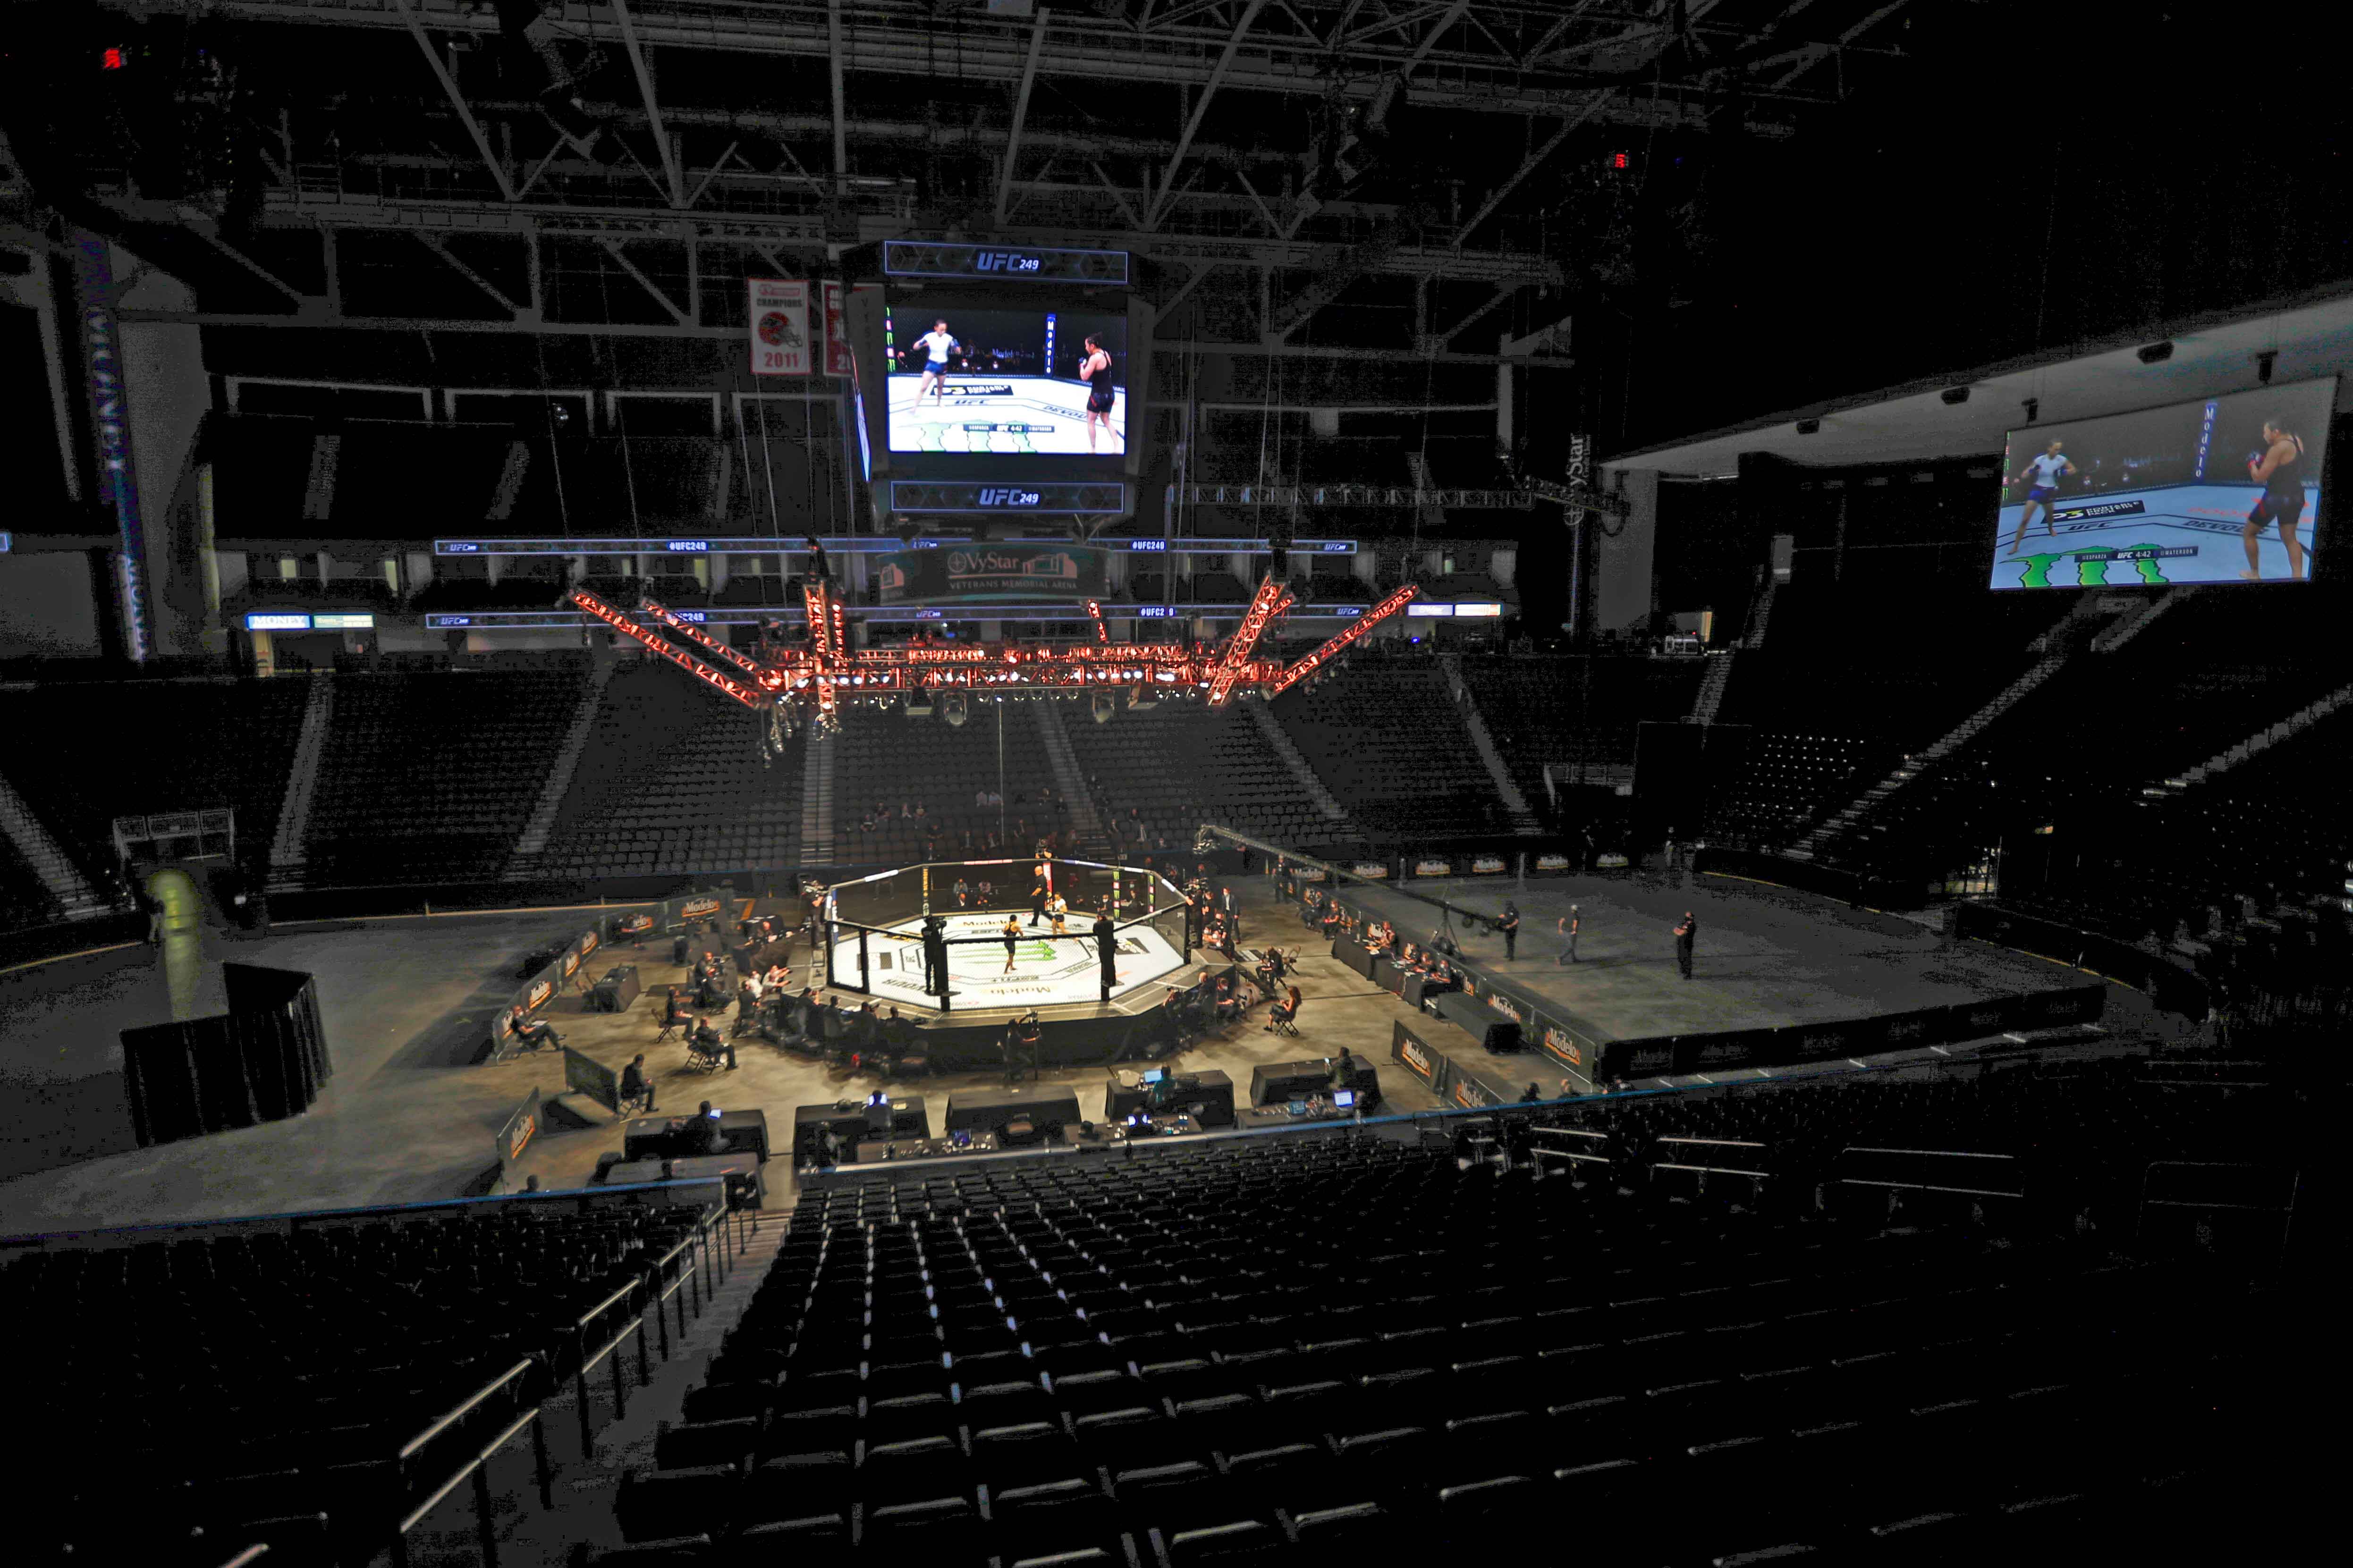 UFC Creates 'Fight Island' To Hold MMA Matches During Virus Outbreak